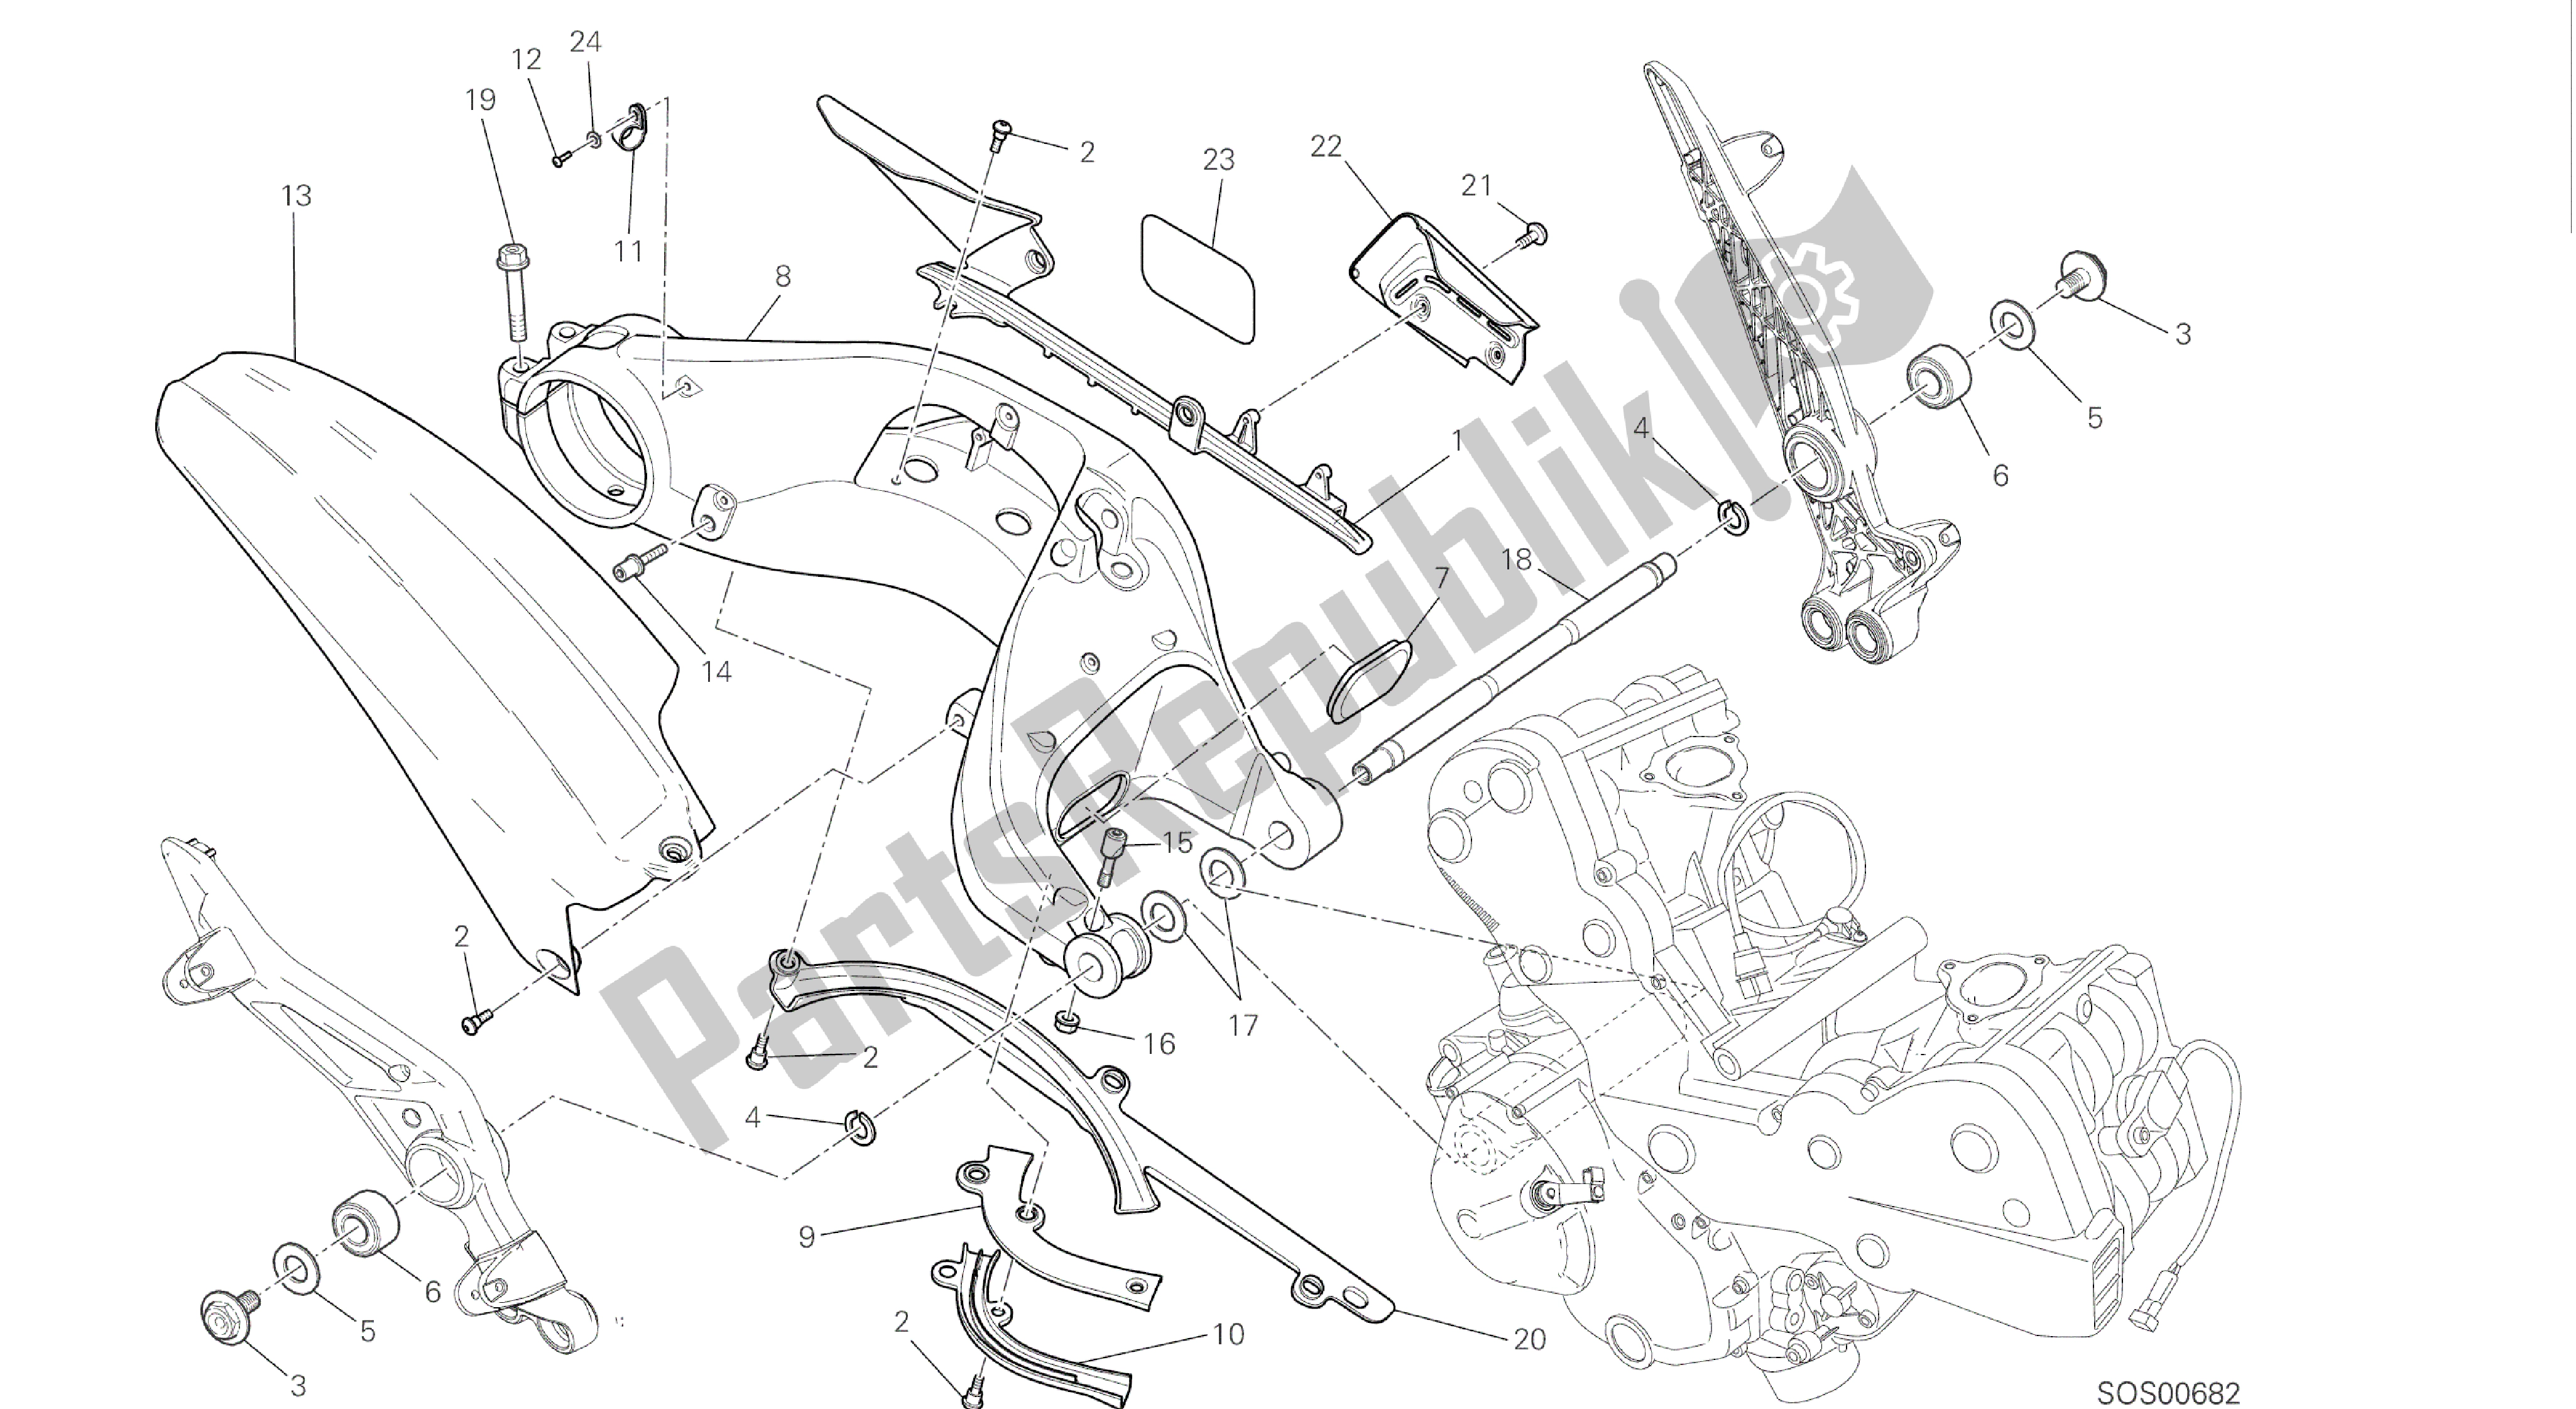 All parts for the Drawing 28a - Forcellone Posteriore [mod:hyp Str;xst:aus]group Frame of the Ducati Hypermotard 821 2015